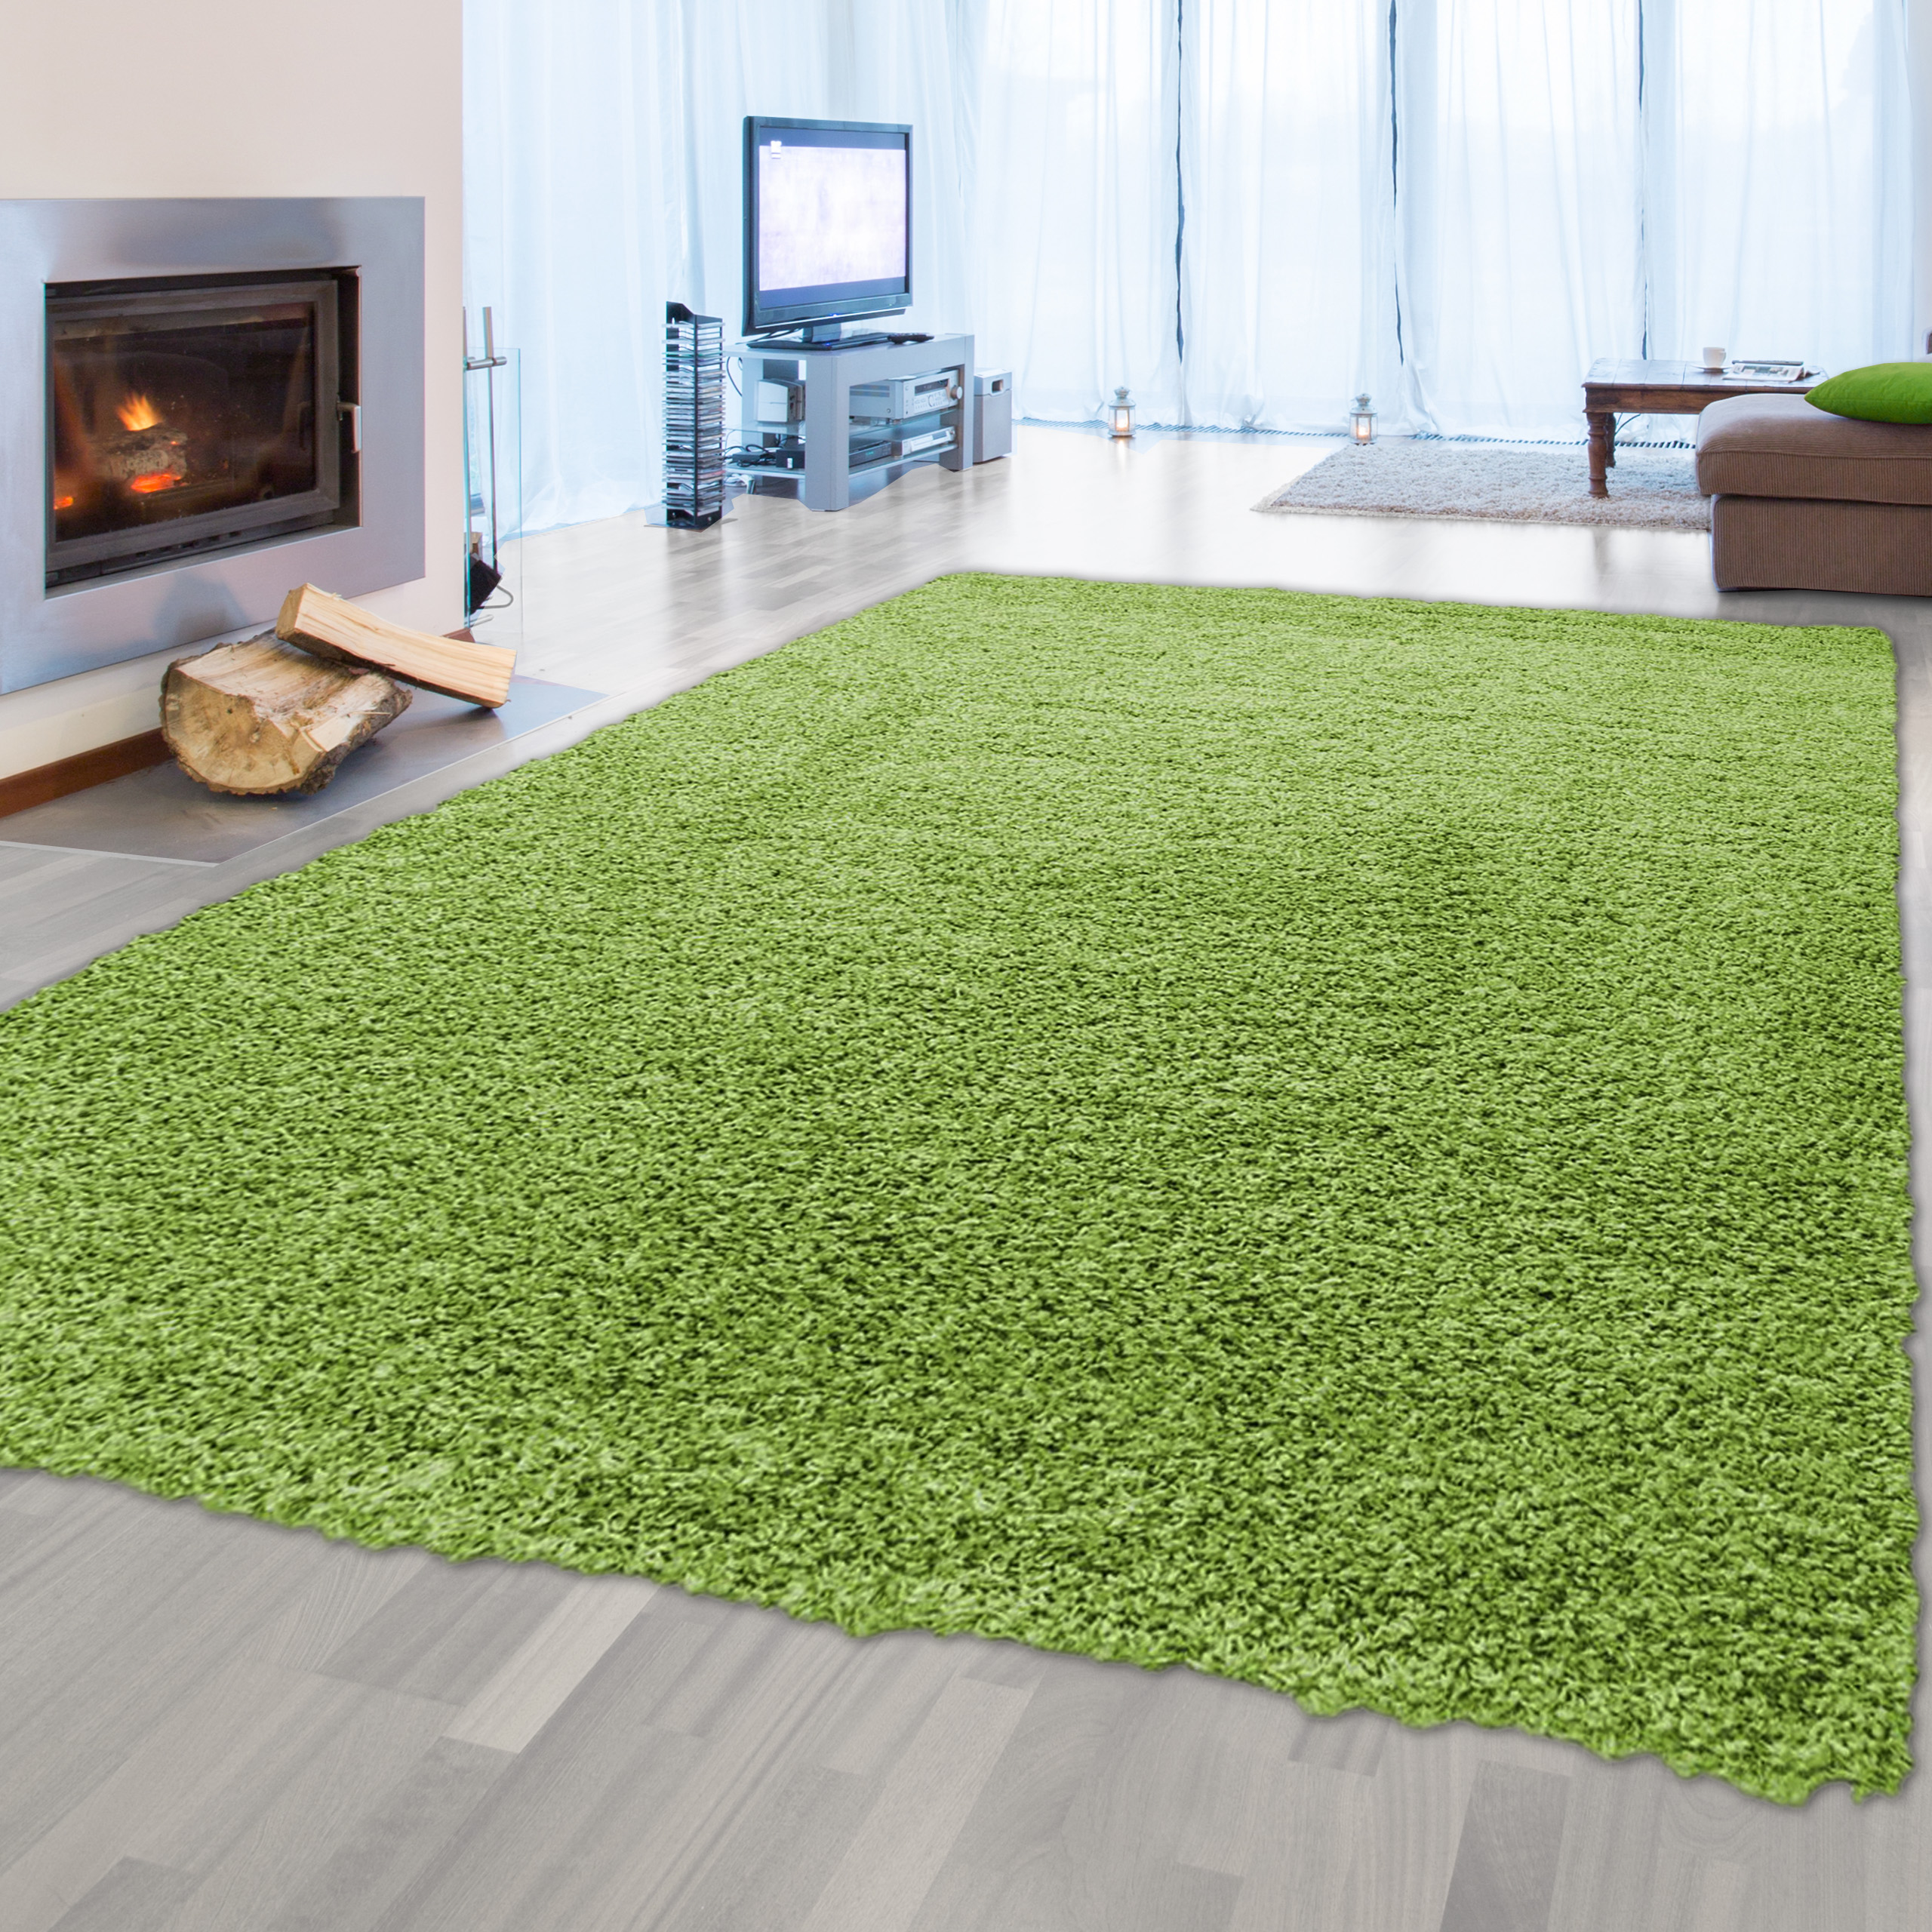 Shag carpet emission free (approx) 100% Merilon 30mm 2.2 overall Total weight Teppich-Traum / polypropylenes frisee, height (approx) gr m² 